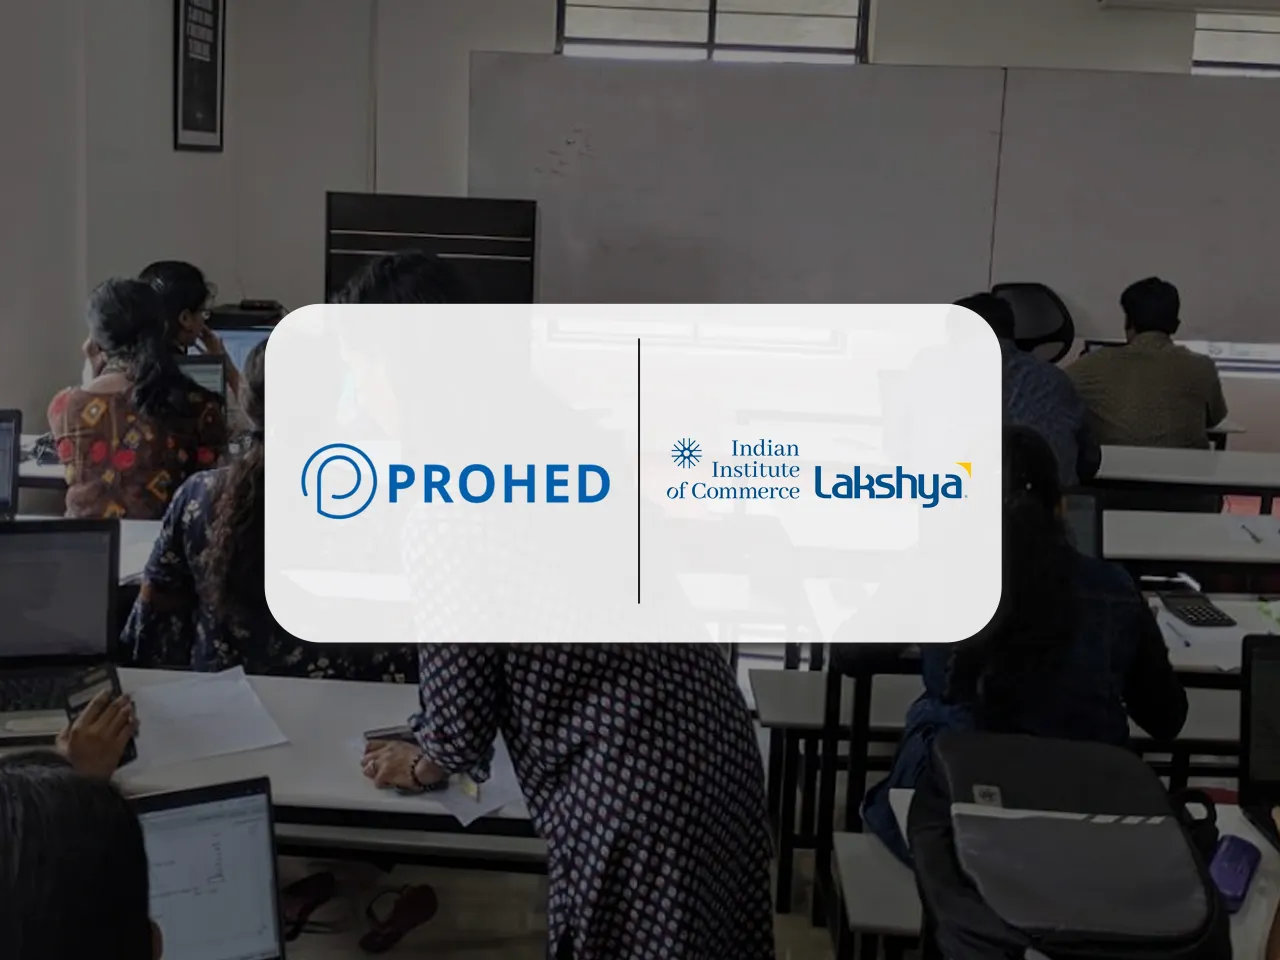 PROHED secures digital mandate for Indian Institute of Commerce Lakshya